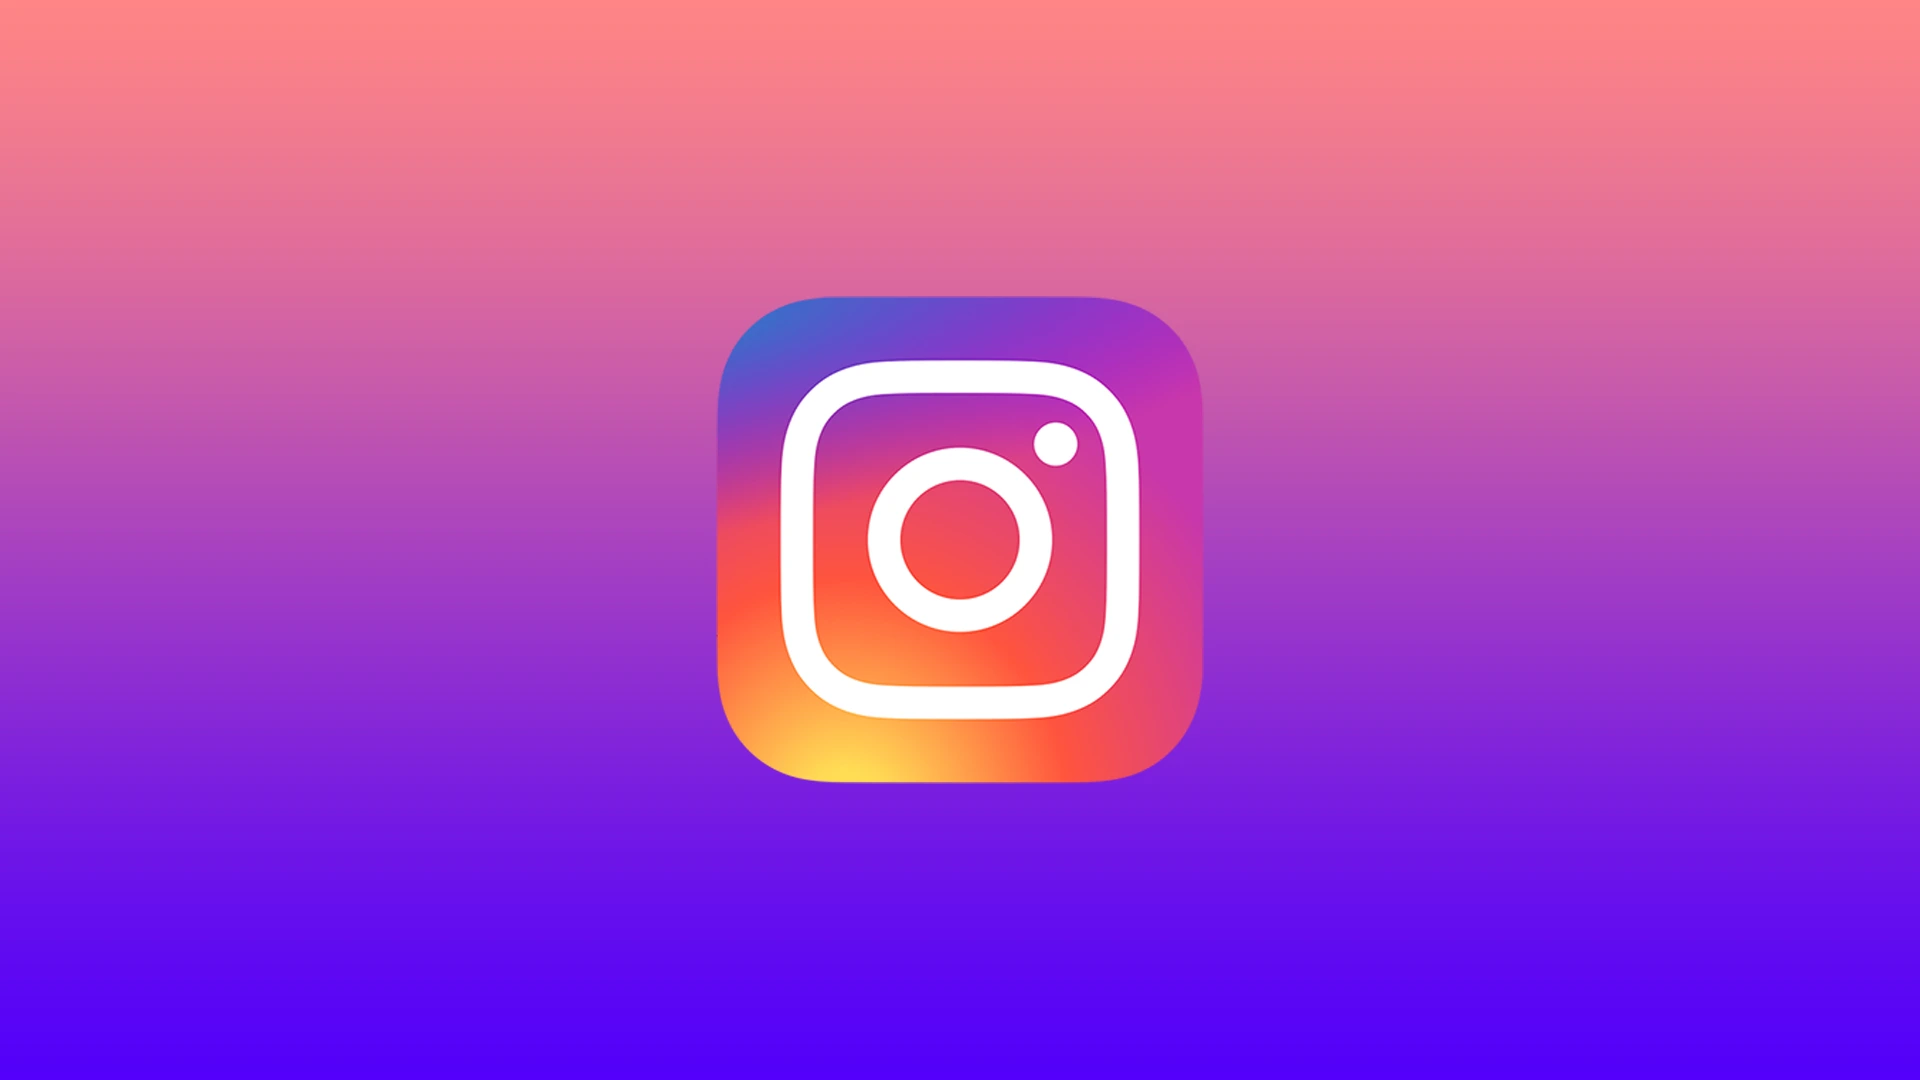 Instagram decided not to implement a full-screen feed and suggested posts